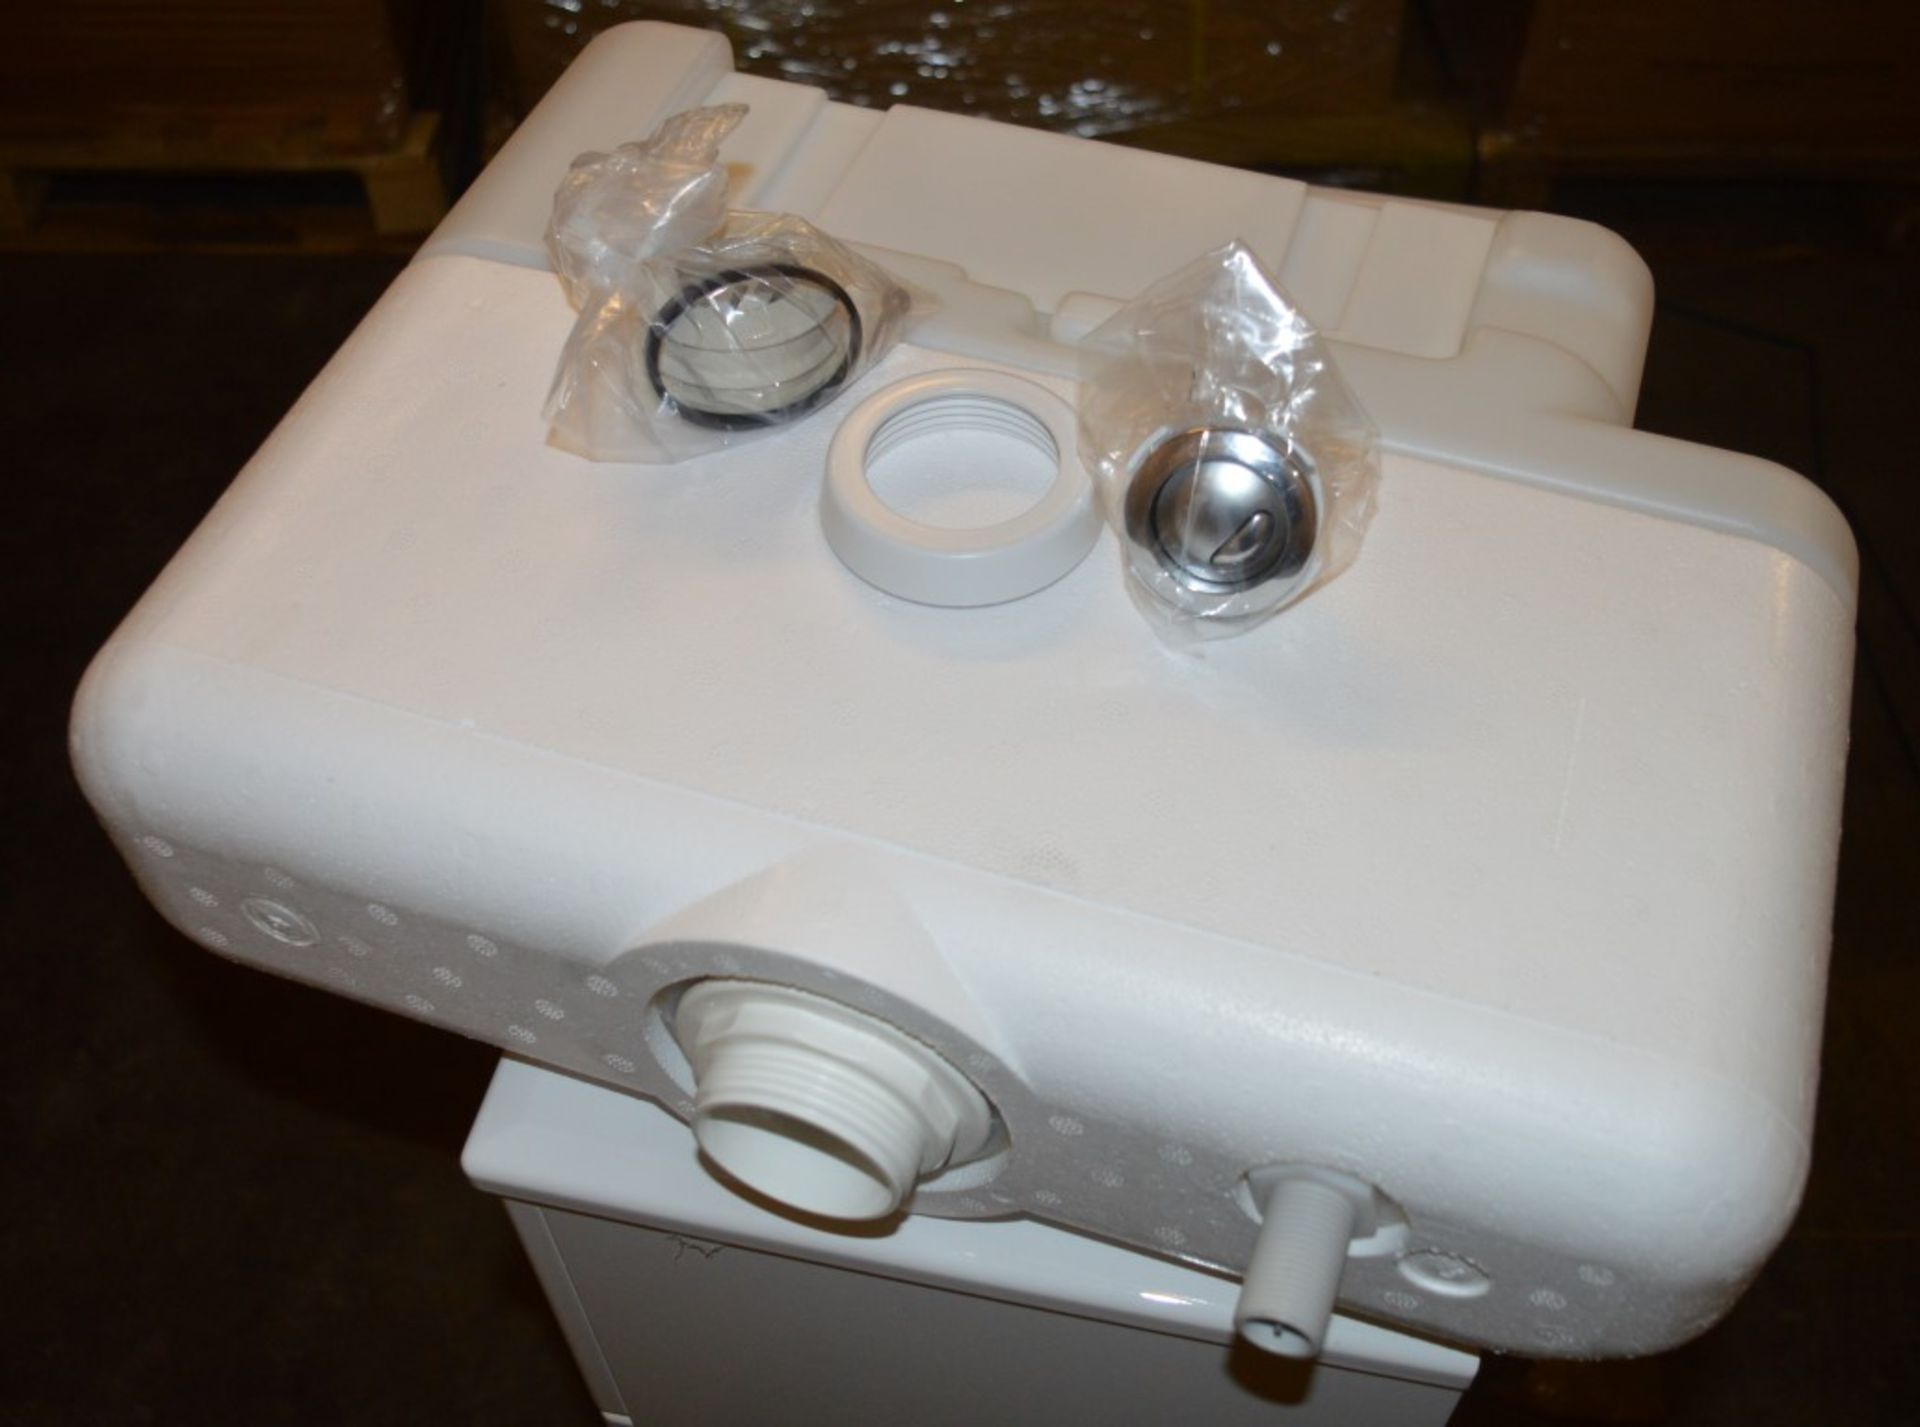 10 x Venizia BTW Toilet Pan Units in Gloss White With Concealed Cisterns - 500mm Width - Includes - Image 4 of 6